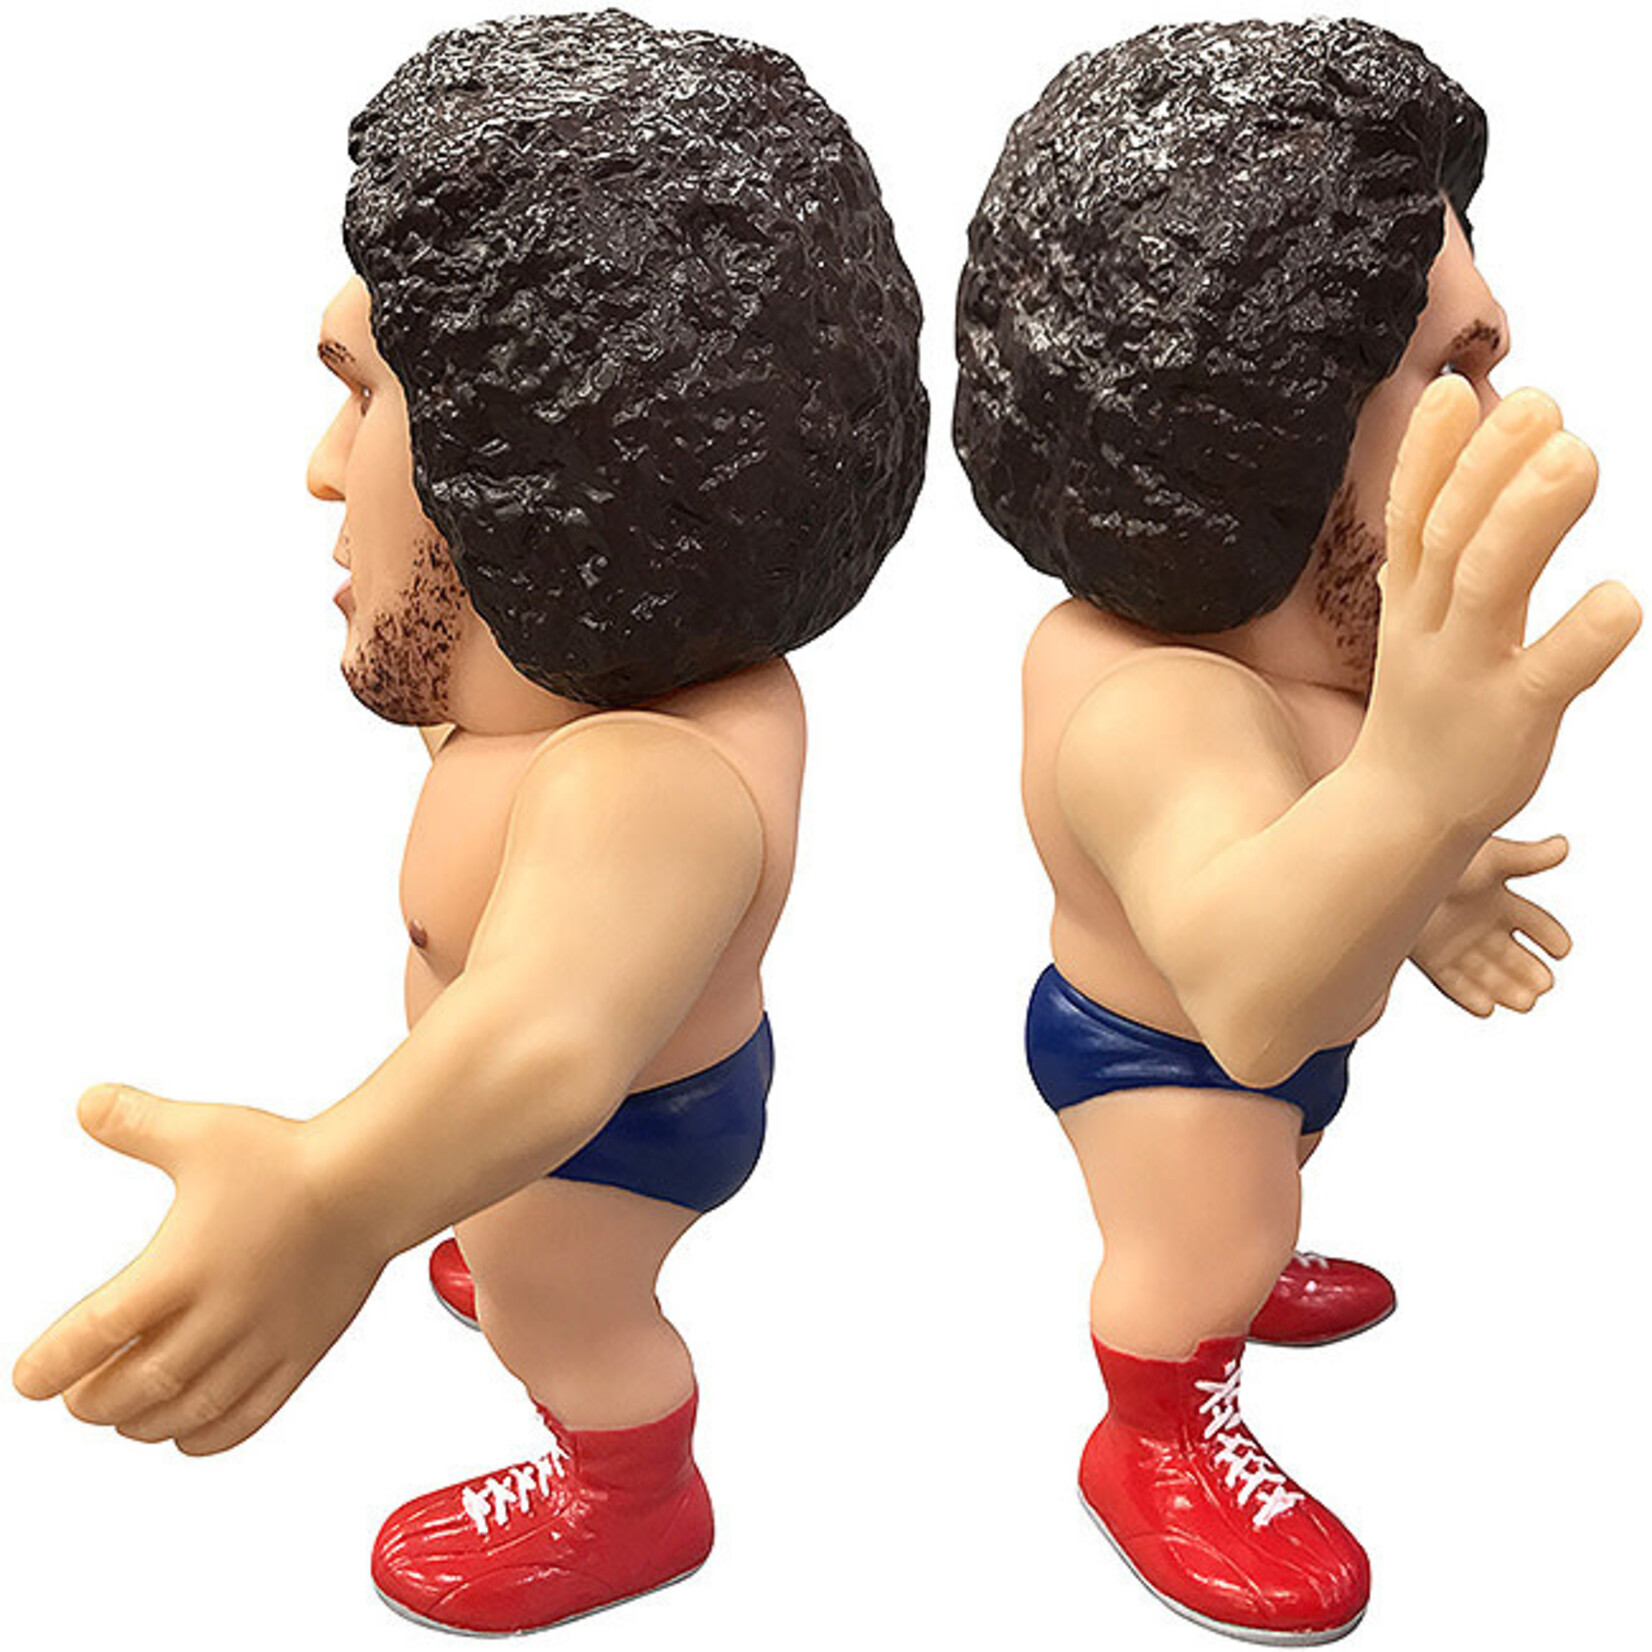 16 Directions Andre The Giant WWE 16 Directions Figure